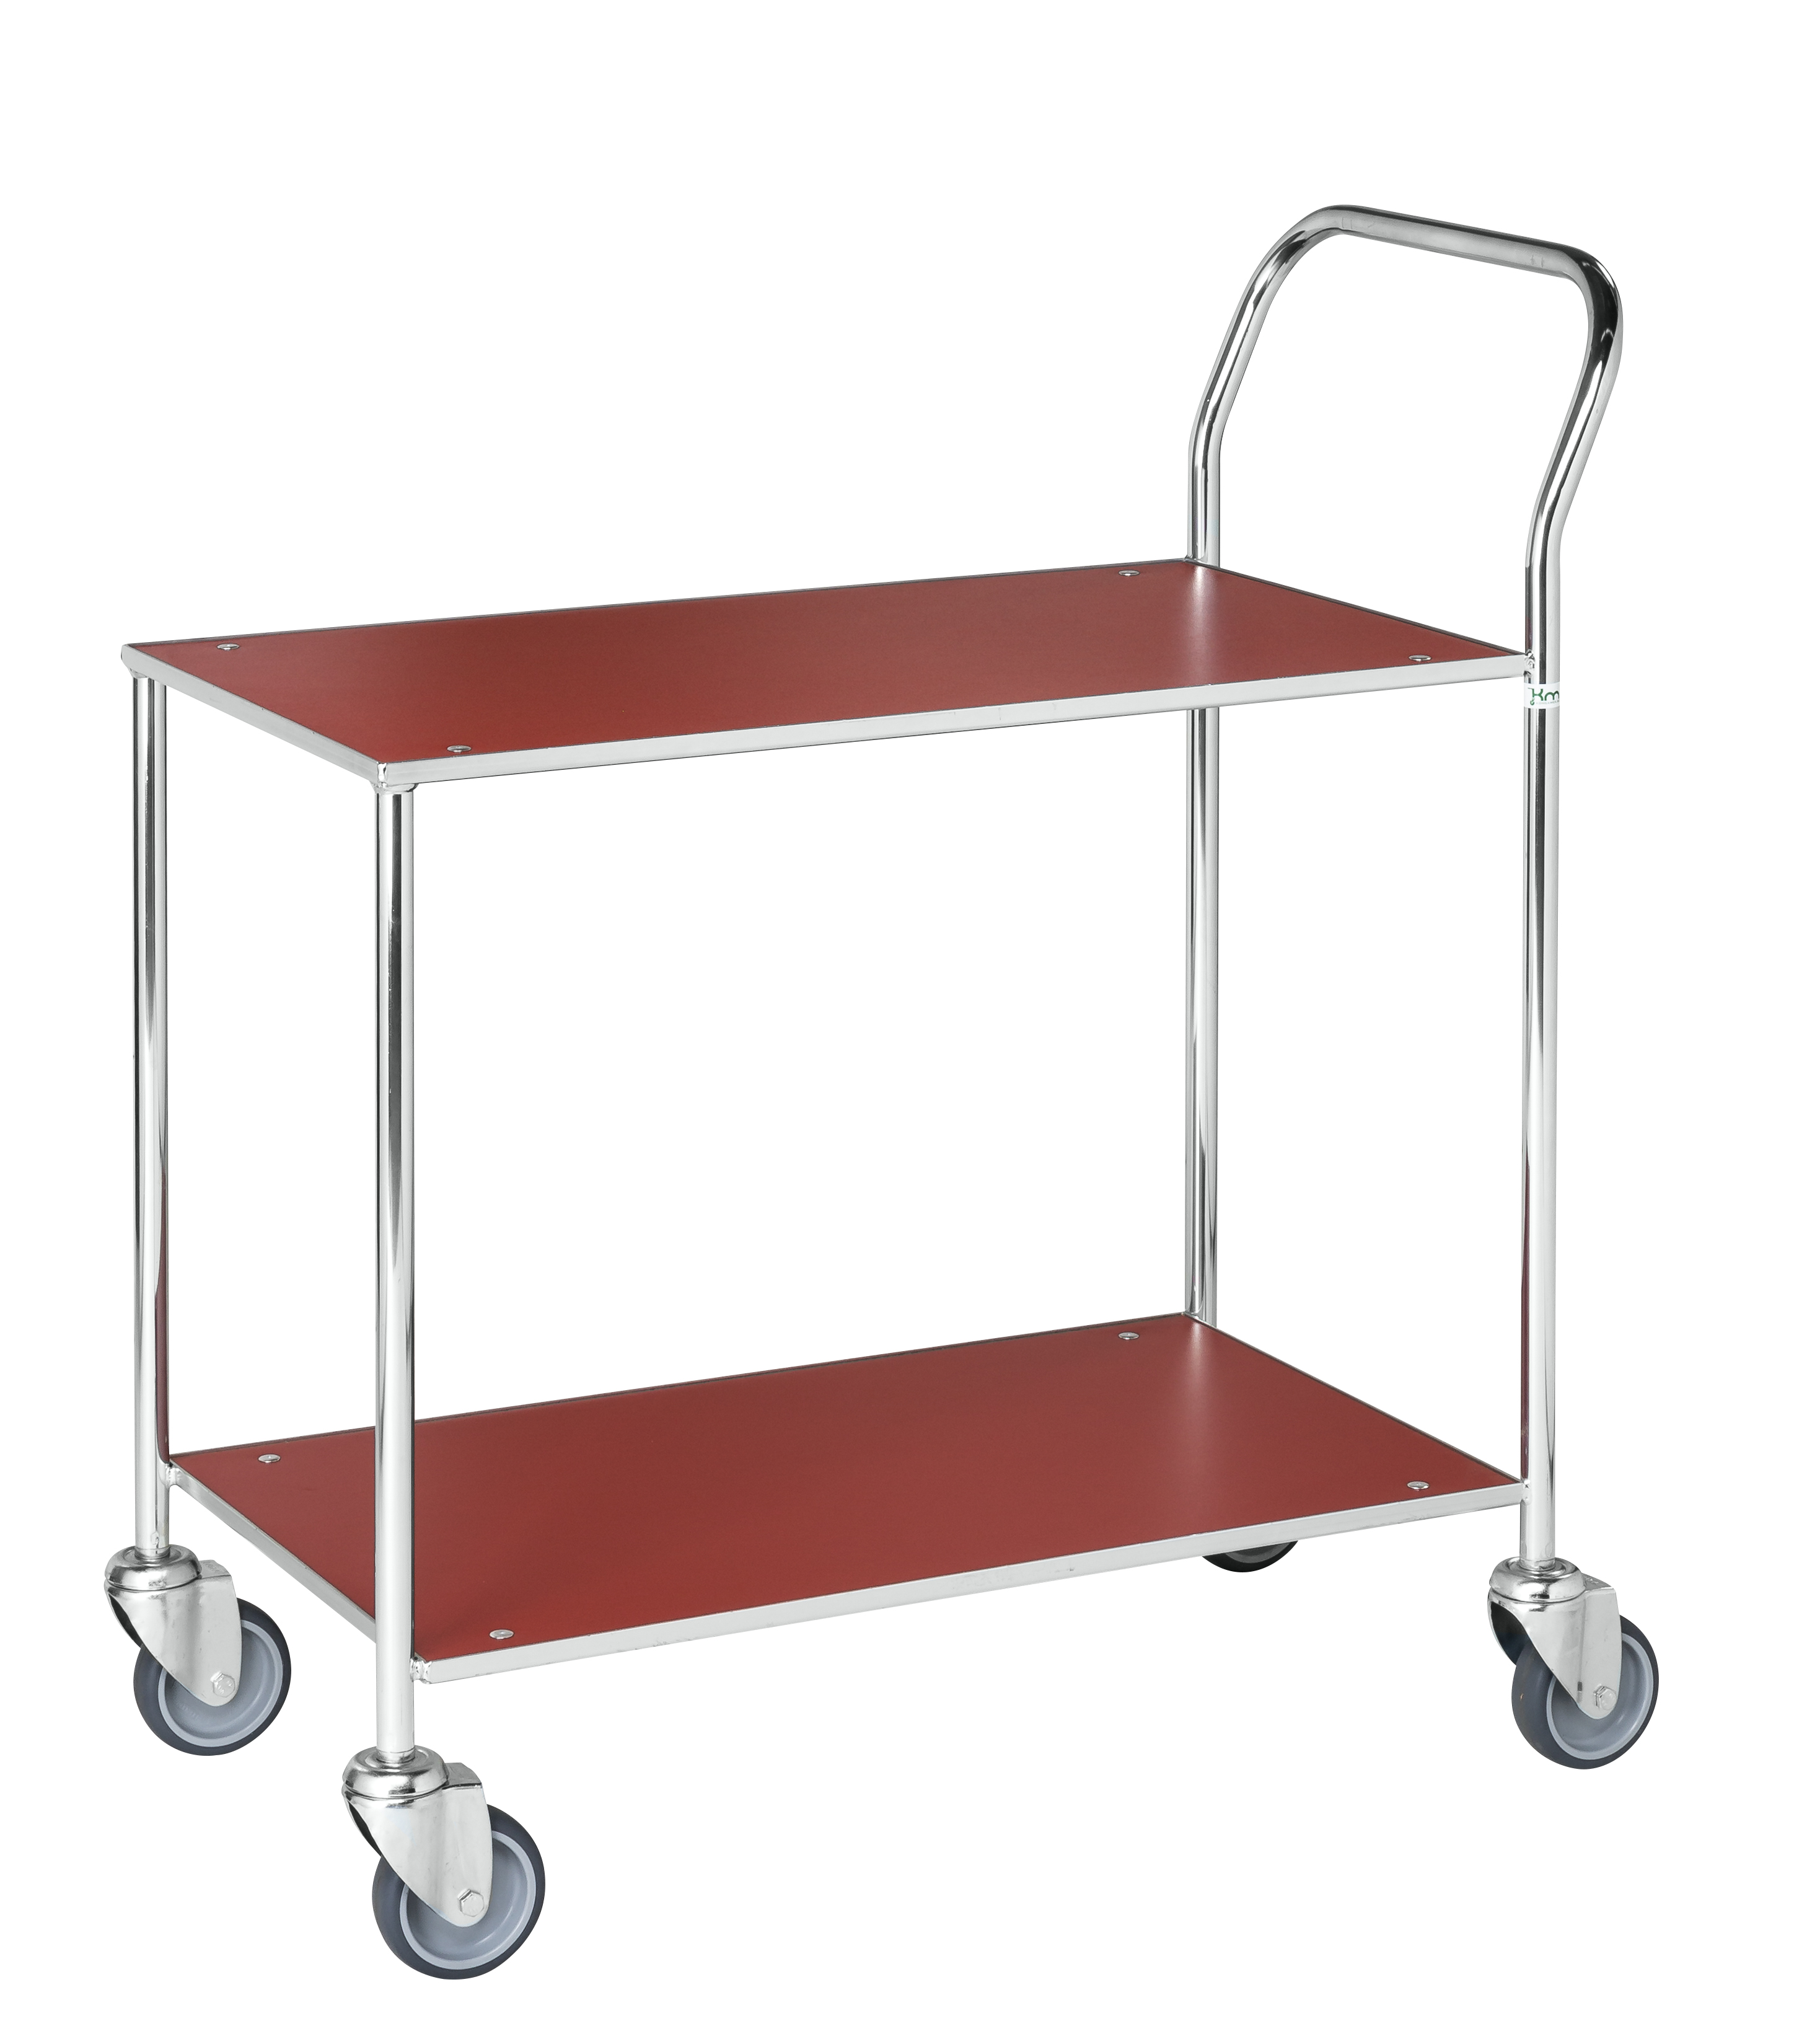 Small table trolley, fully welded KM172-1